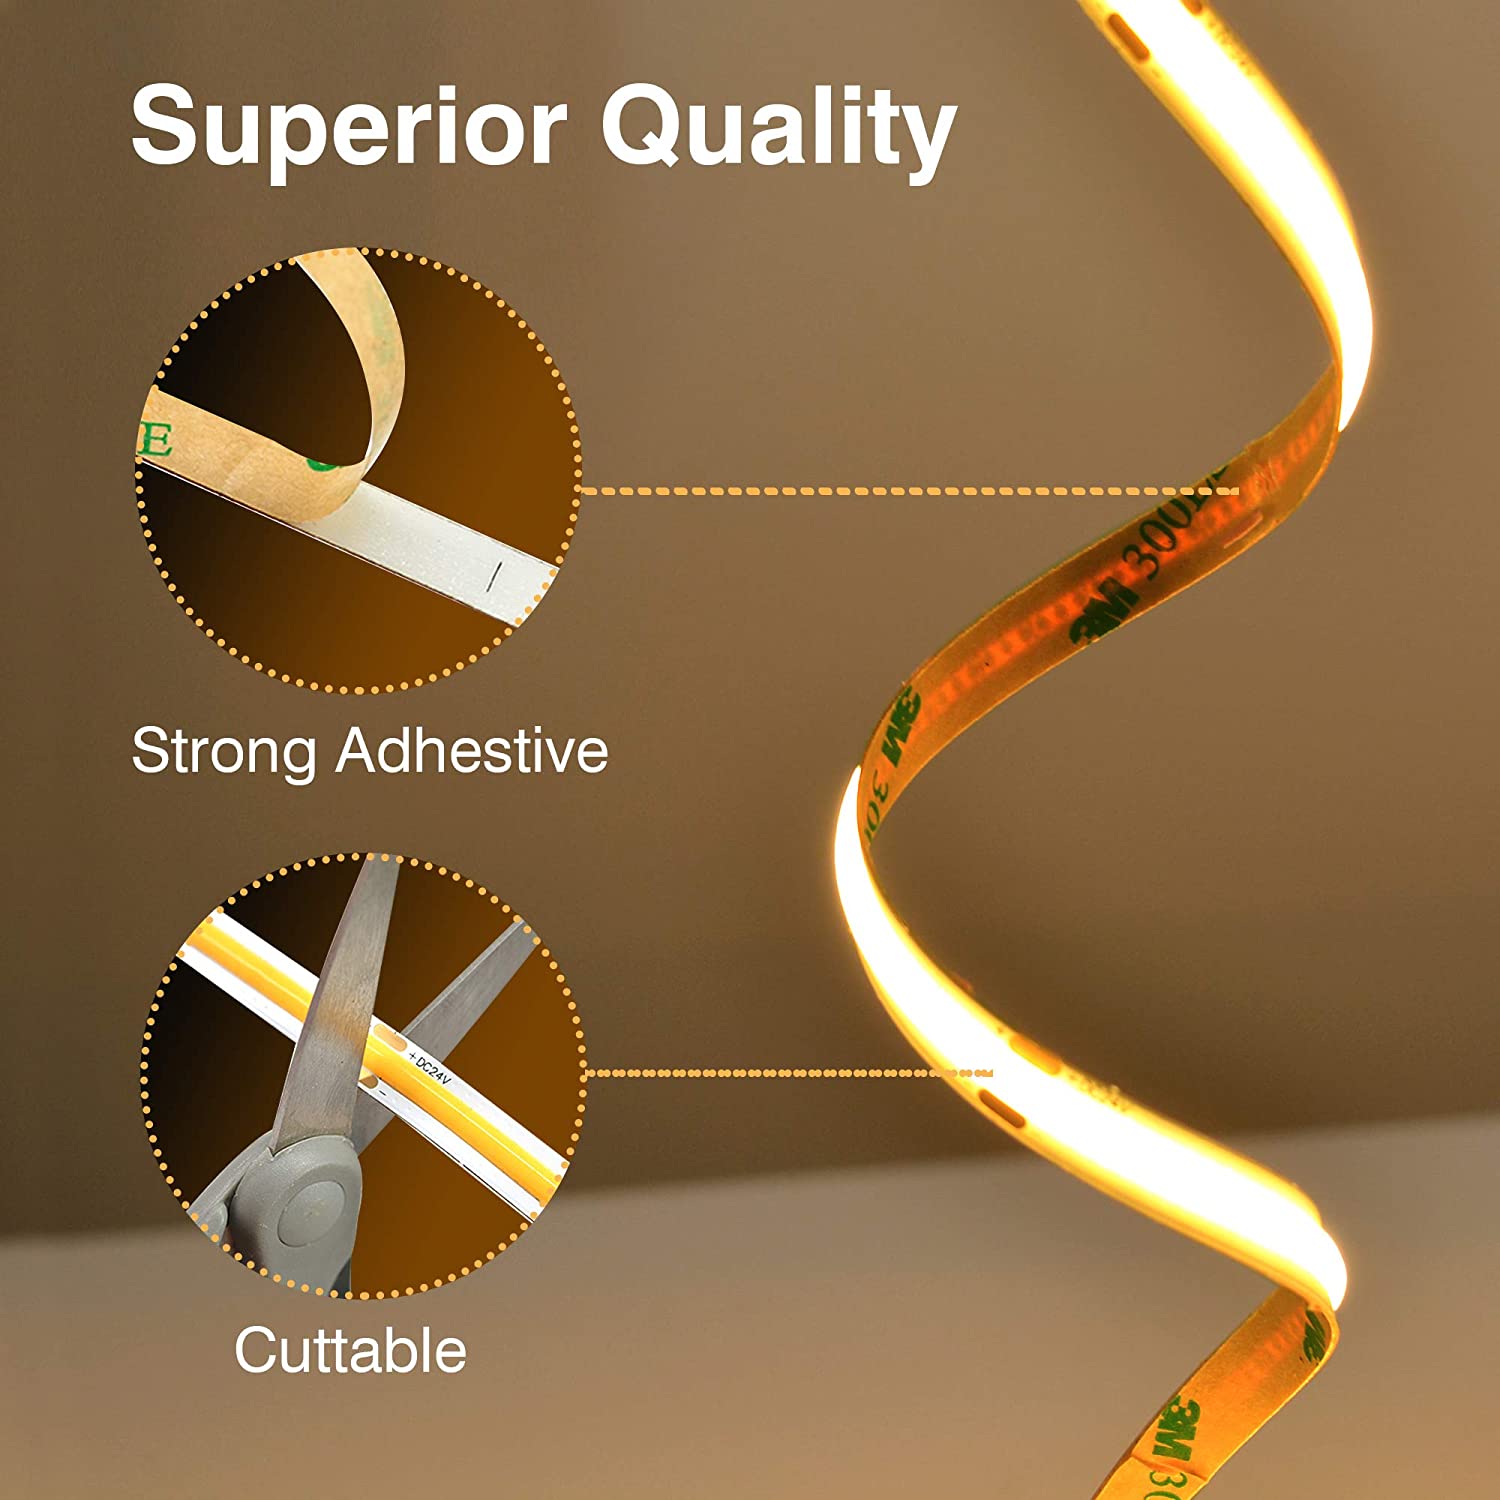 Send inquiry for FB06 12V Flexible COB Strip Light Width 5mm Dotless LED Tape Light with RoHS, CE for Ambient Illumination to high quality COB Strip Light supplier. Wholesale LED Tape Light directly from China COB Strip Light manufacturers/exporters. Get a factory sale price list and become a distributor/agent-vstled.com